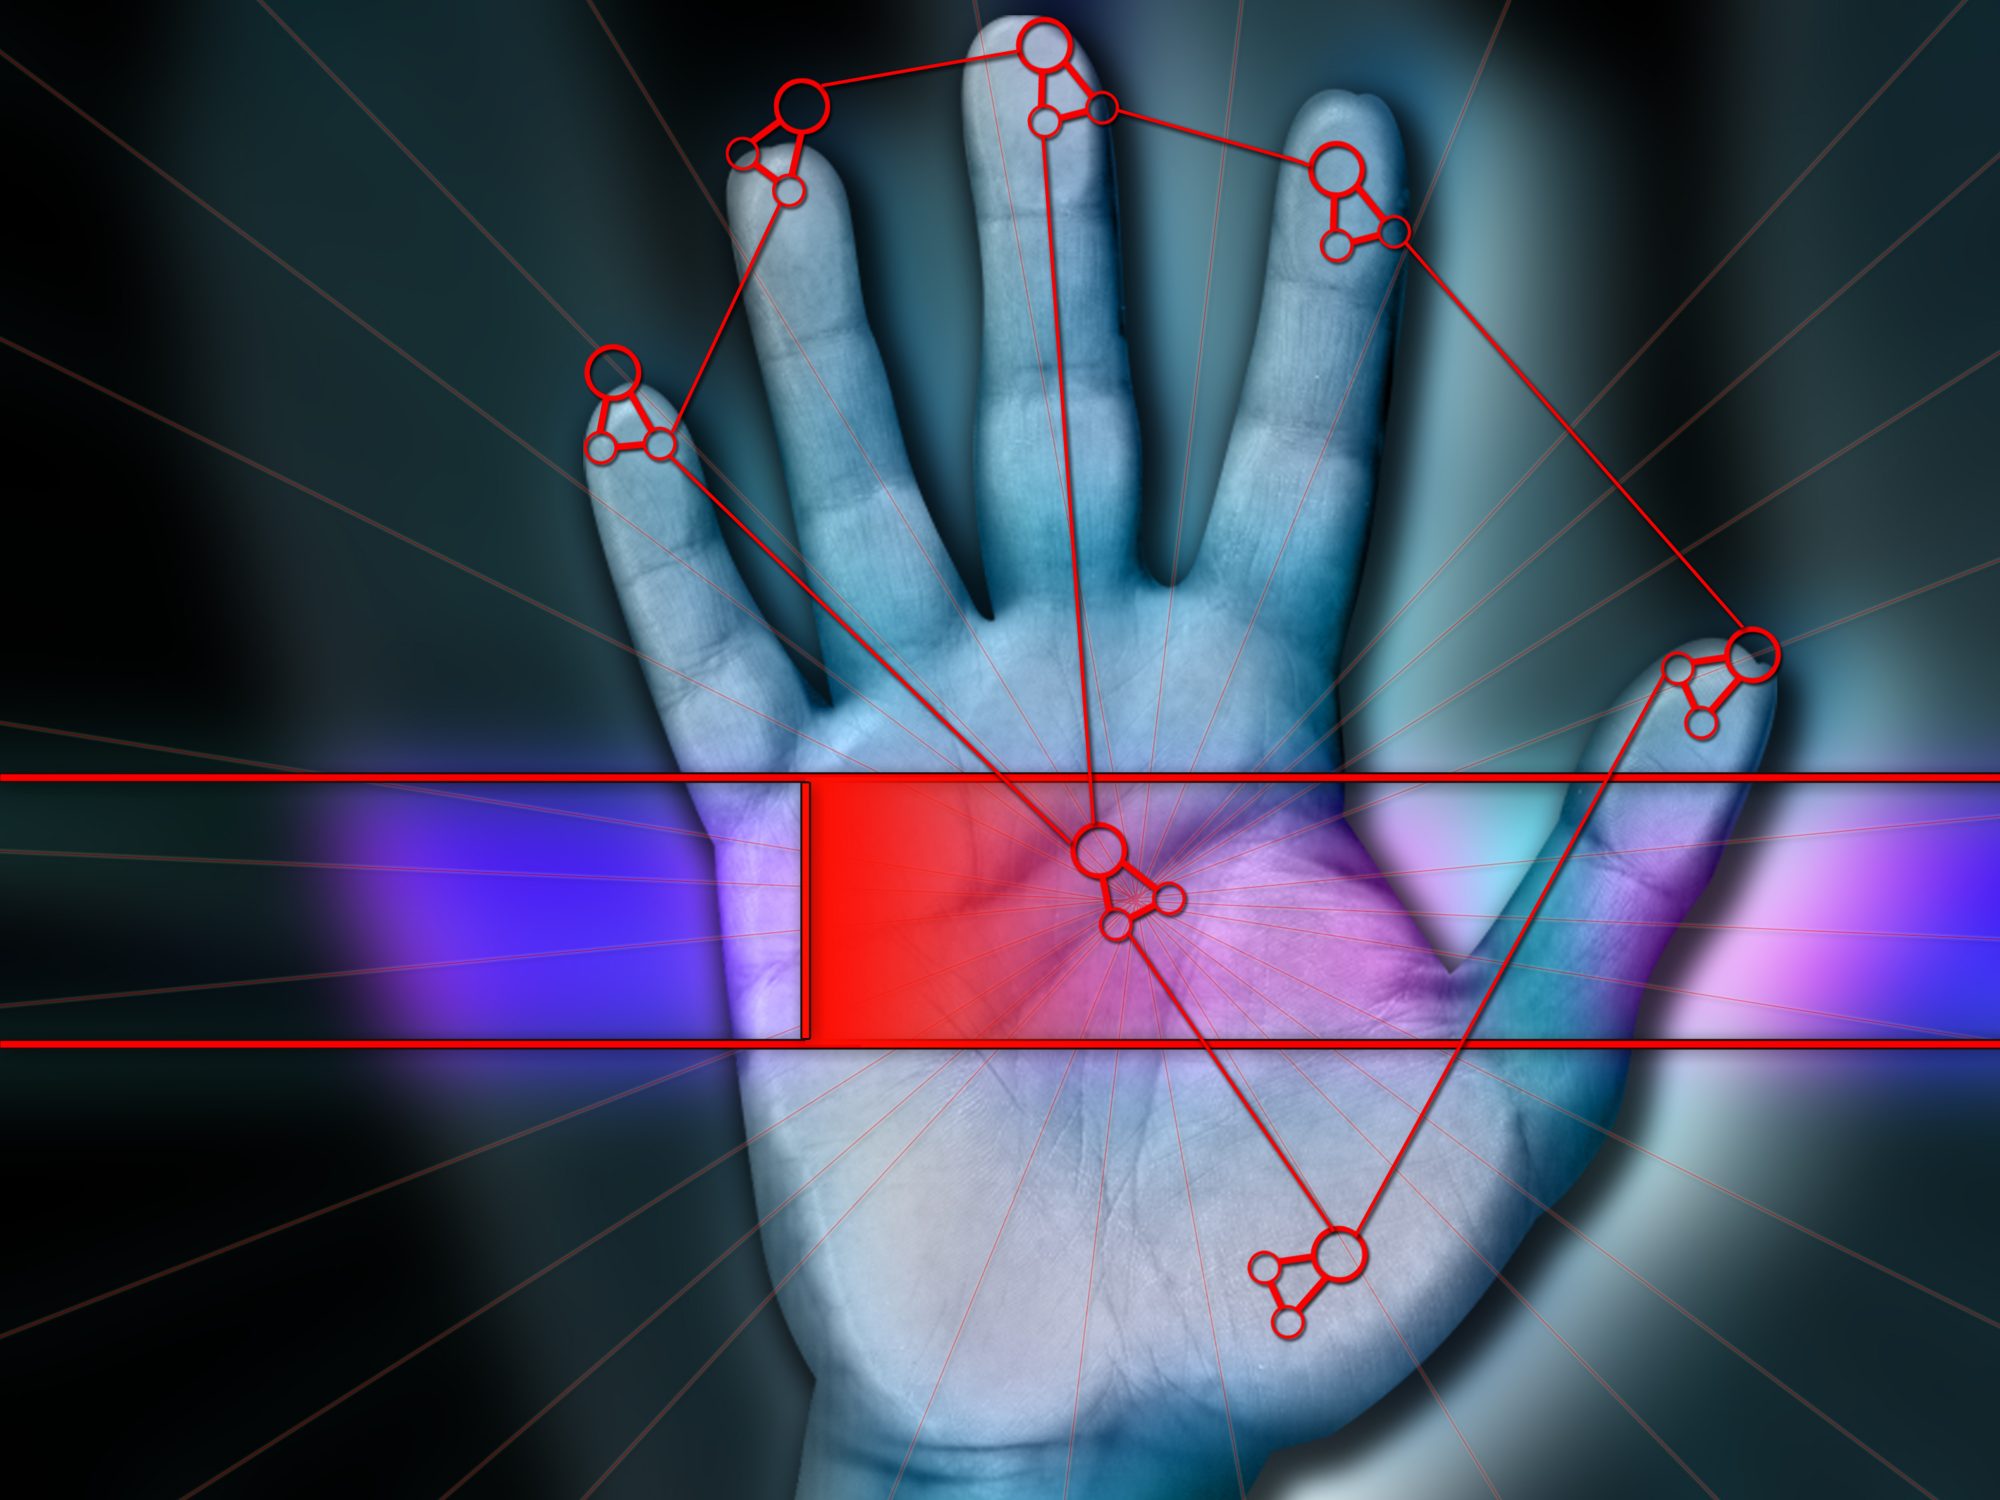 Biometric high security palm scanning for security network access